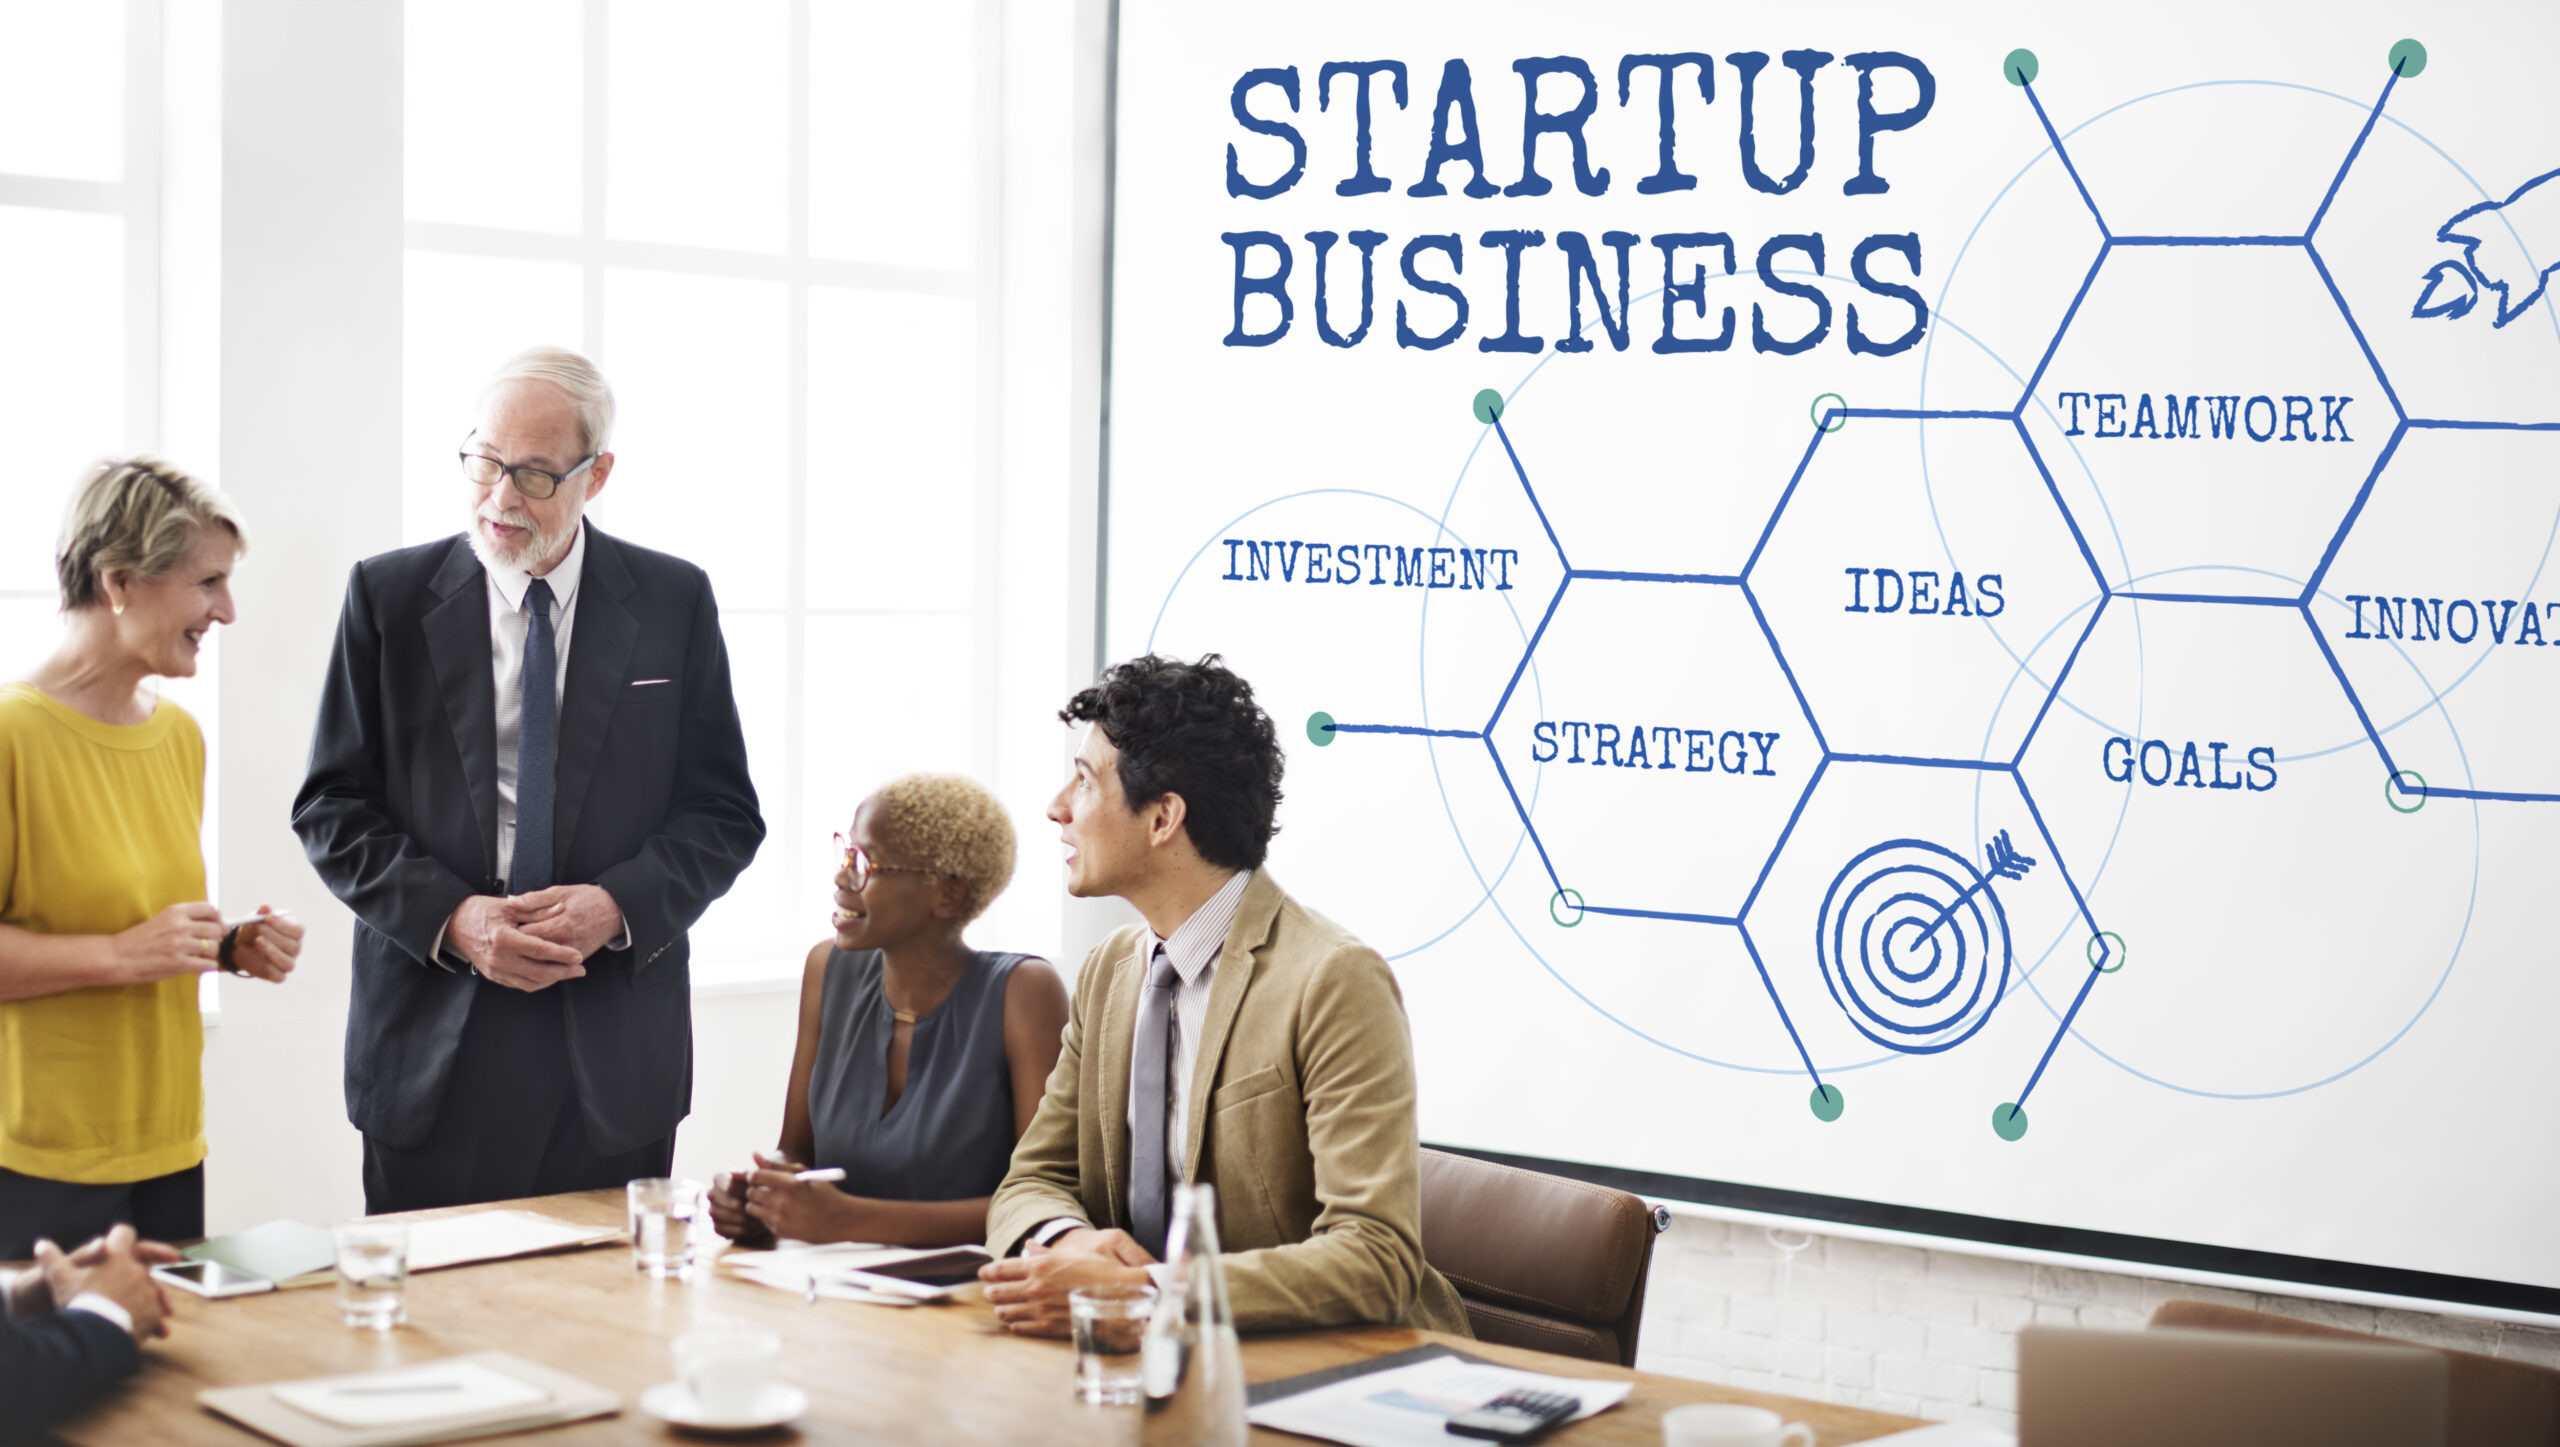 Small Business & Startup image